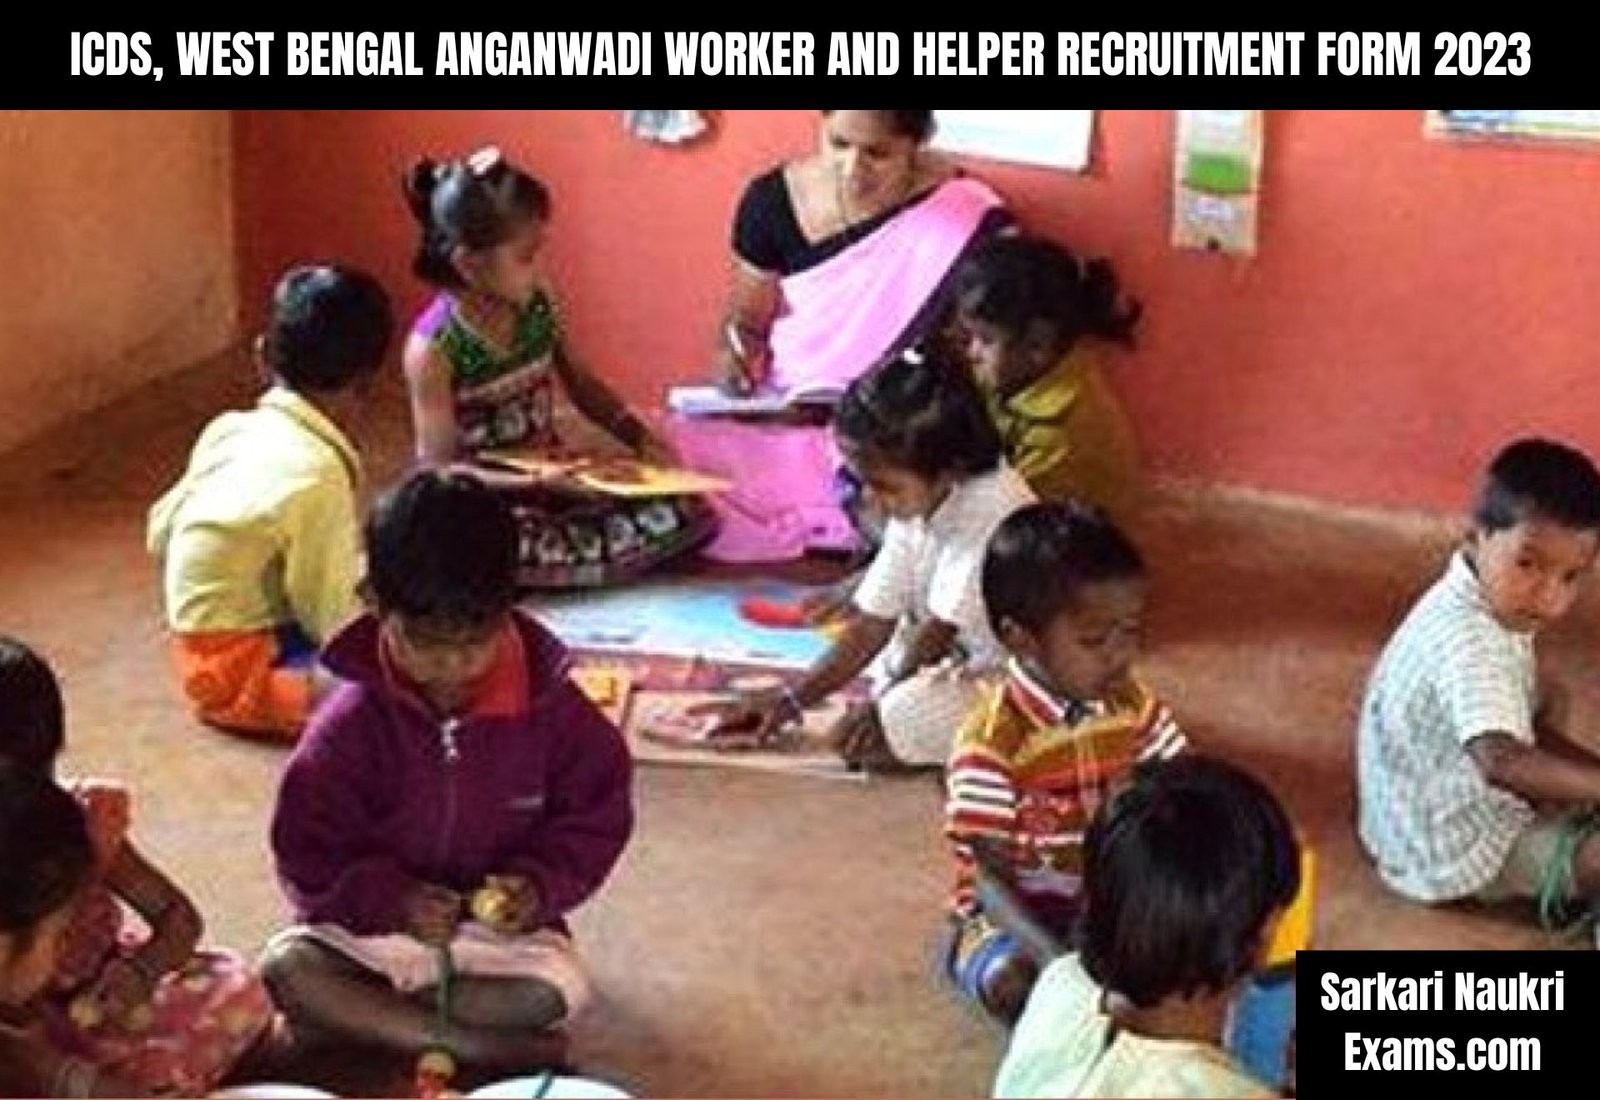 ICDS, West Bengal Anganwadi Worker and Helper Recruitment Form 2023 | 5th Pass Job